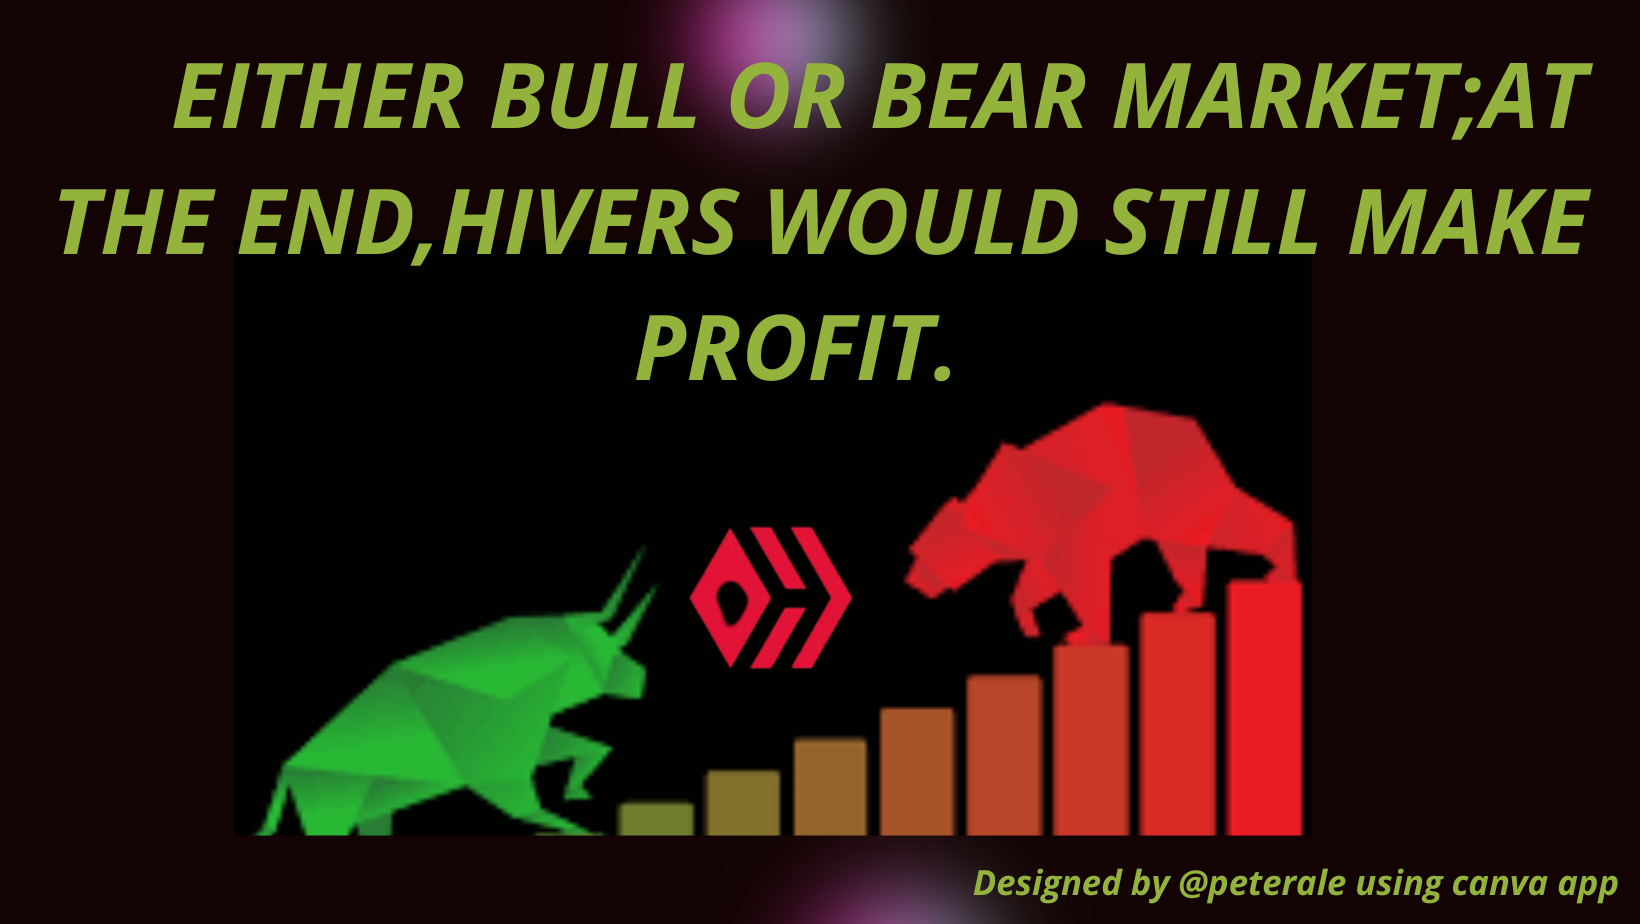 @peterale/either-bull-or-bear-market-at-the-end-hivers-would-still-make-profit